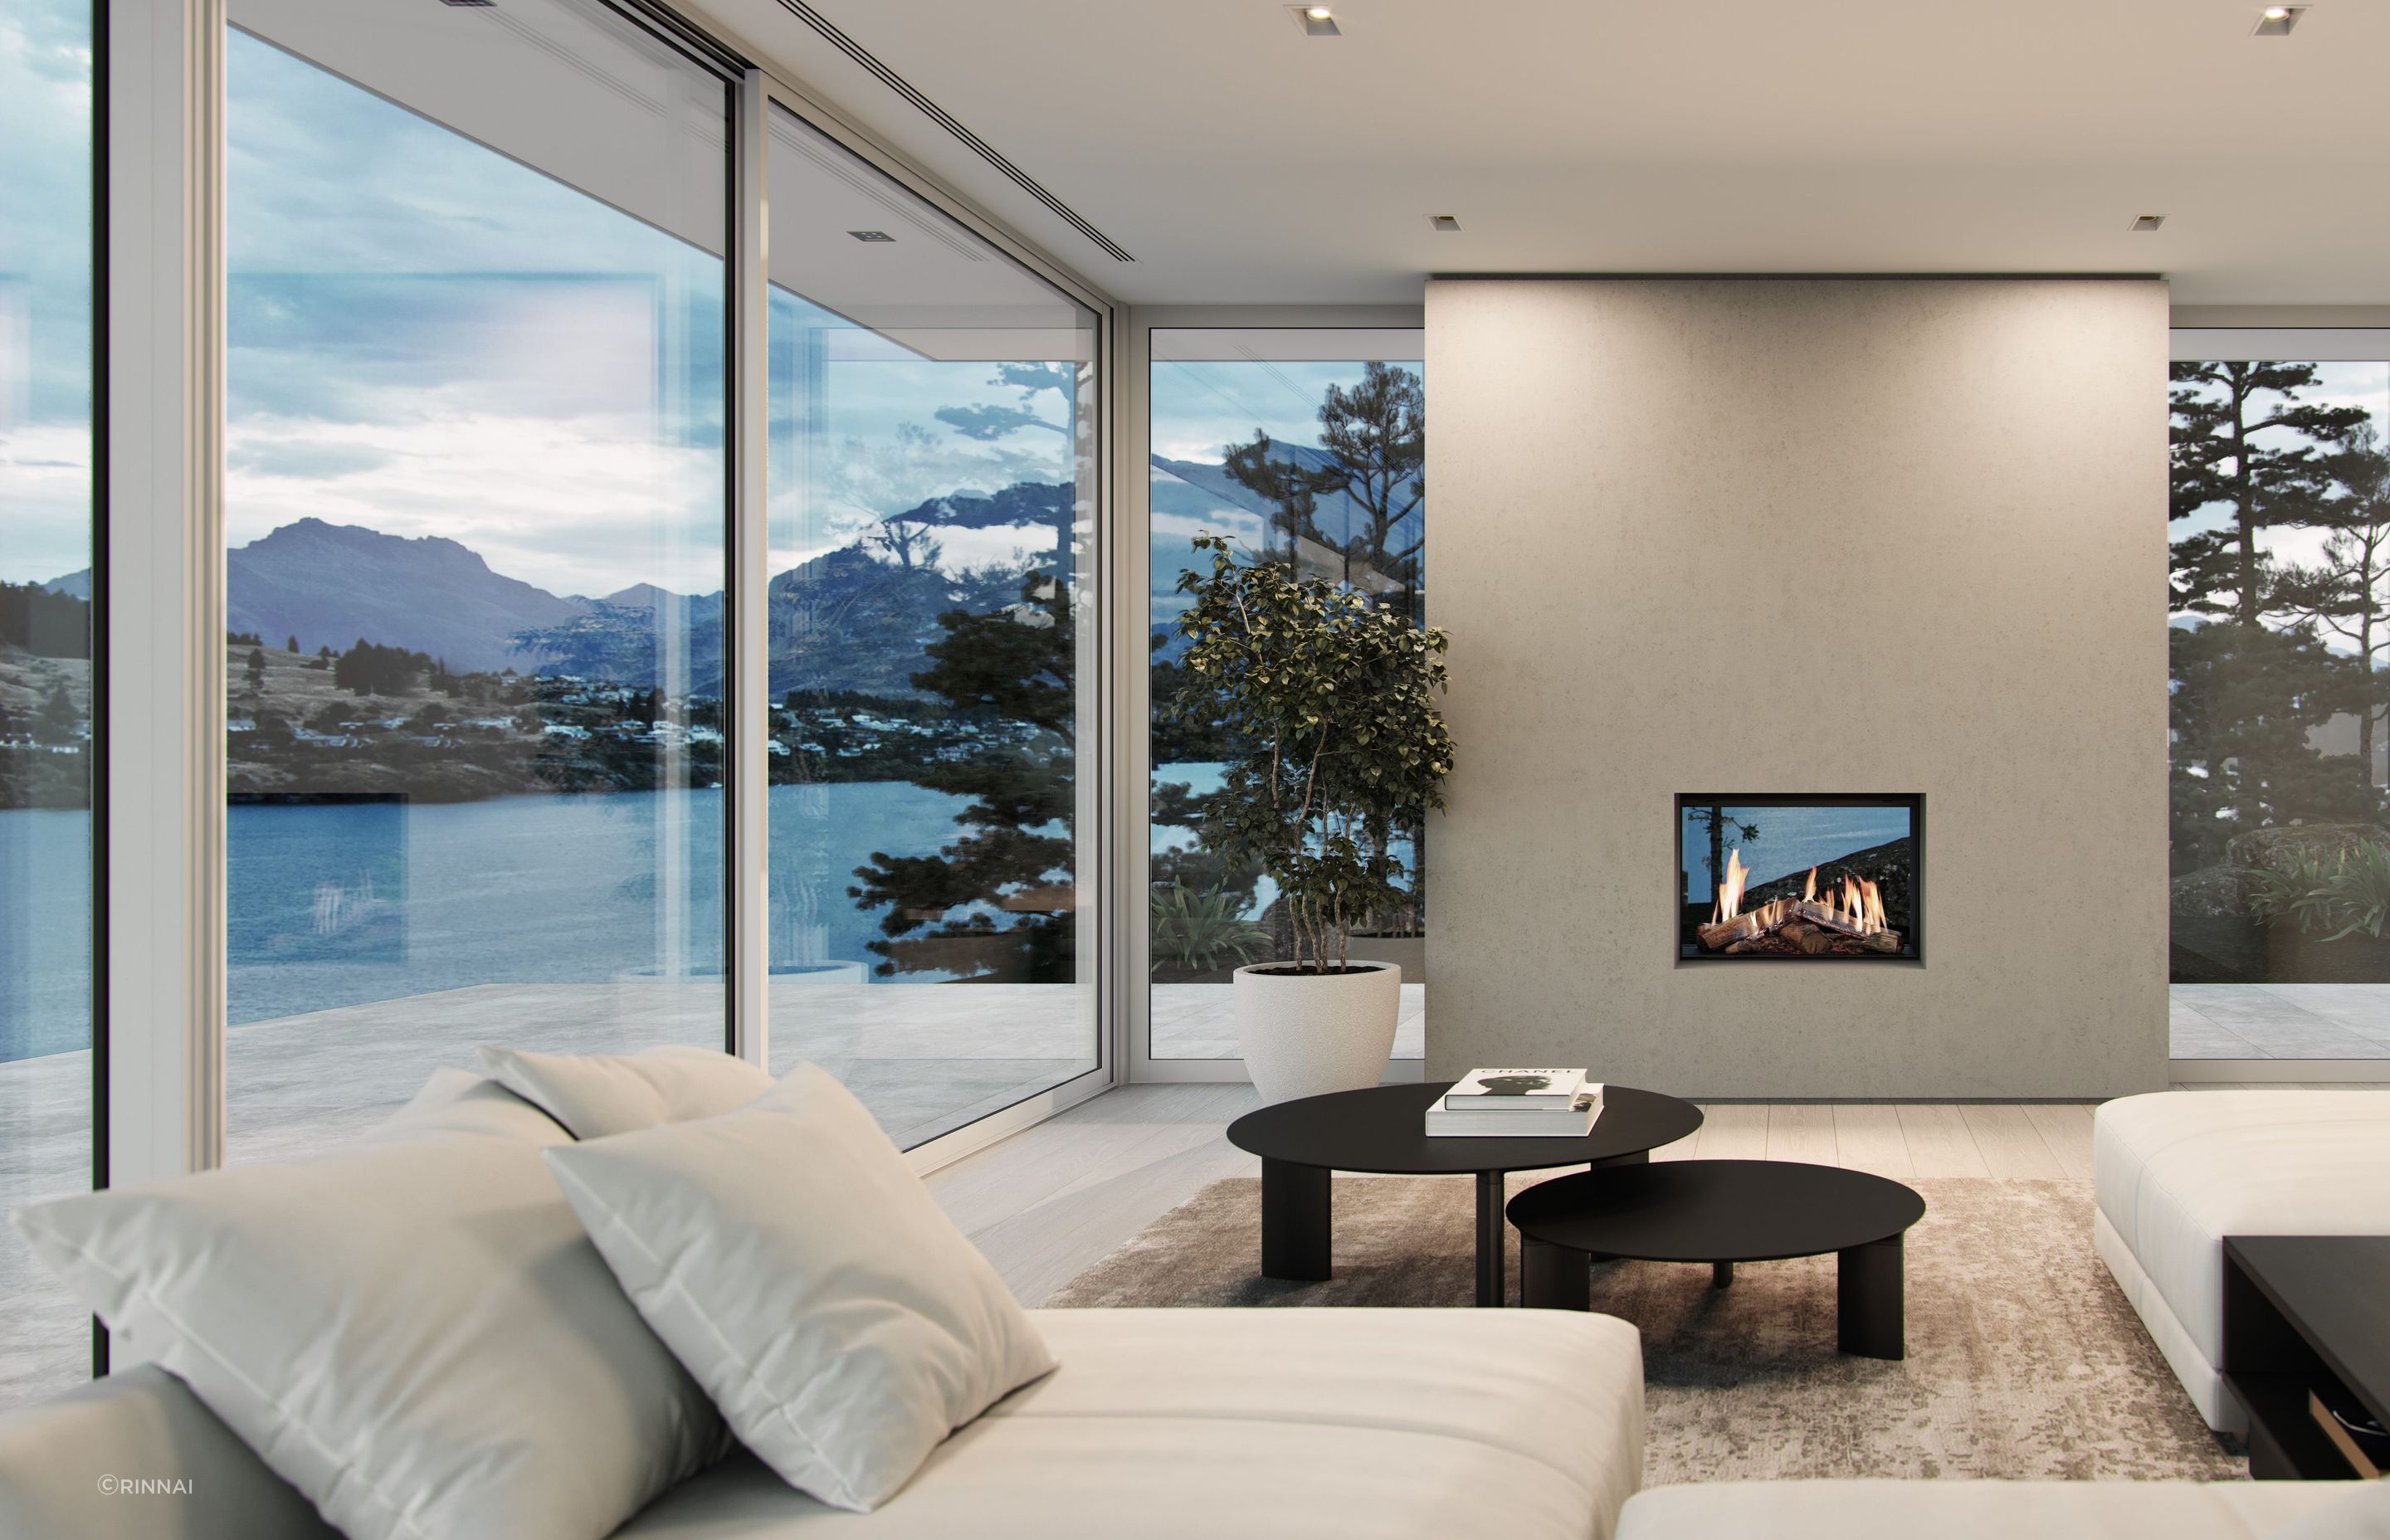 Options like the superb Rinnai Linear Indoor/Outdoor Gas Fire can deliver in more ways than one